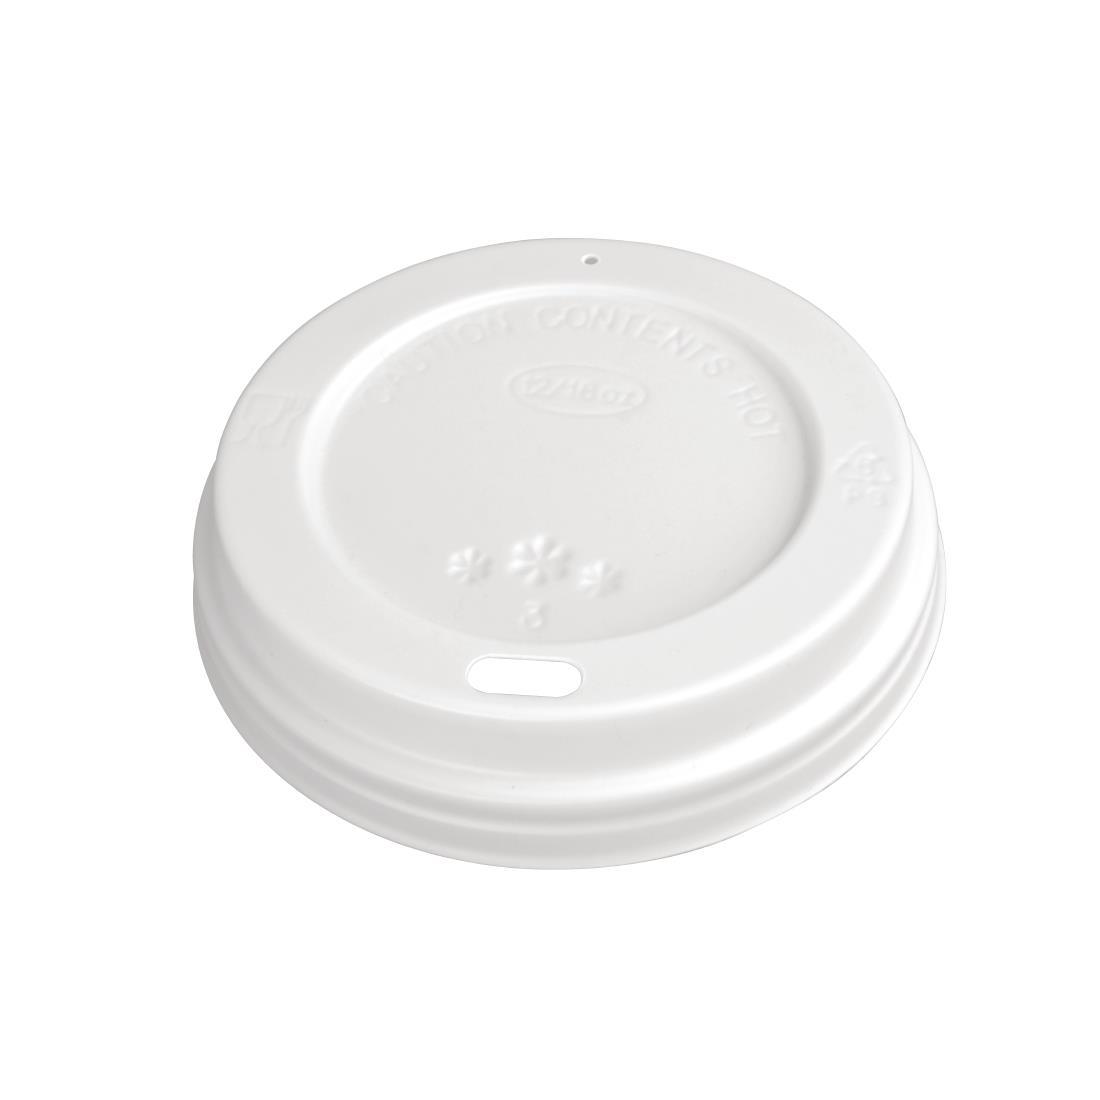 Fiesta Recyclable Coffee Cup Lids White 340ml / 12oz and 455ml / 16oz (Pack of 1000) - CE257  - 1